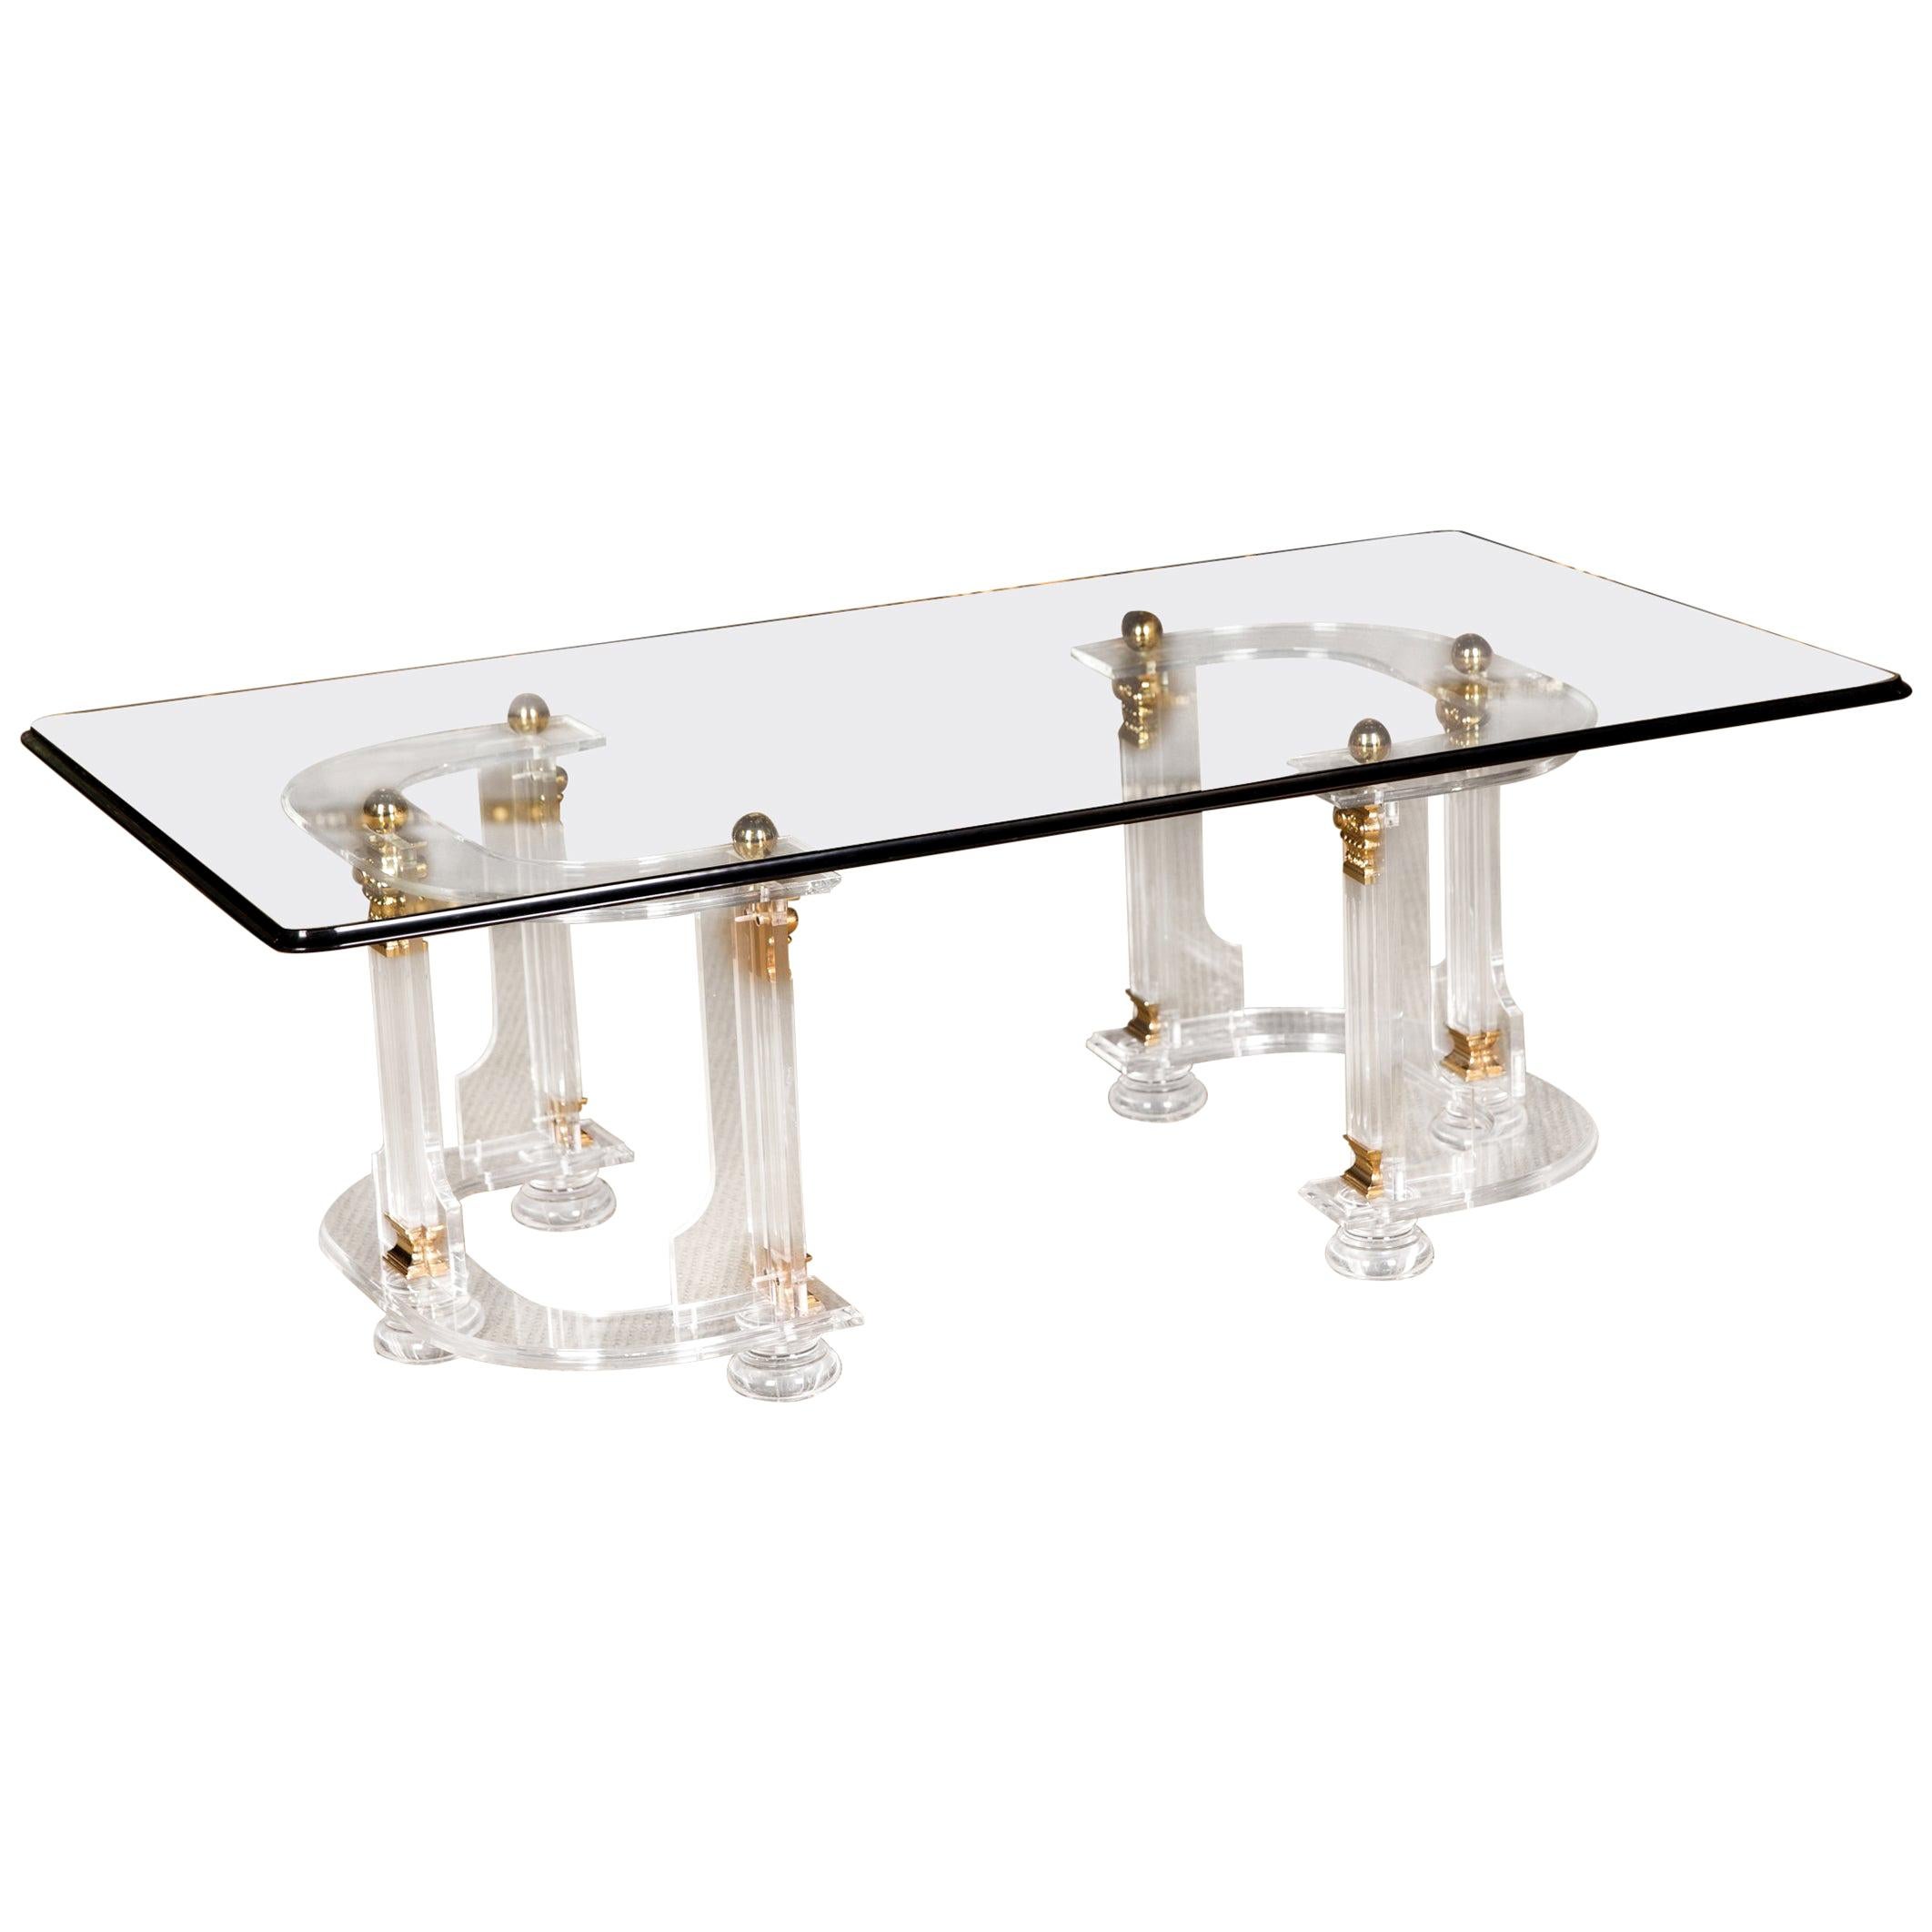 20th Century High Quality Acrylic Coffee Table with Gold Color